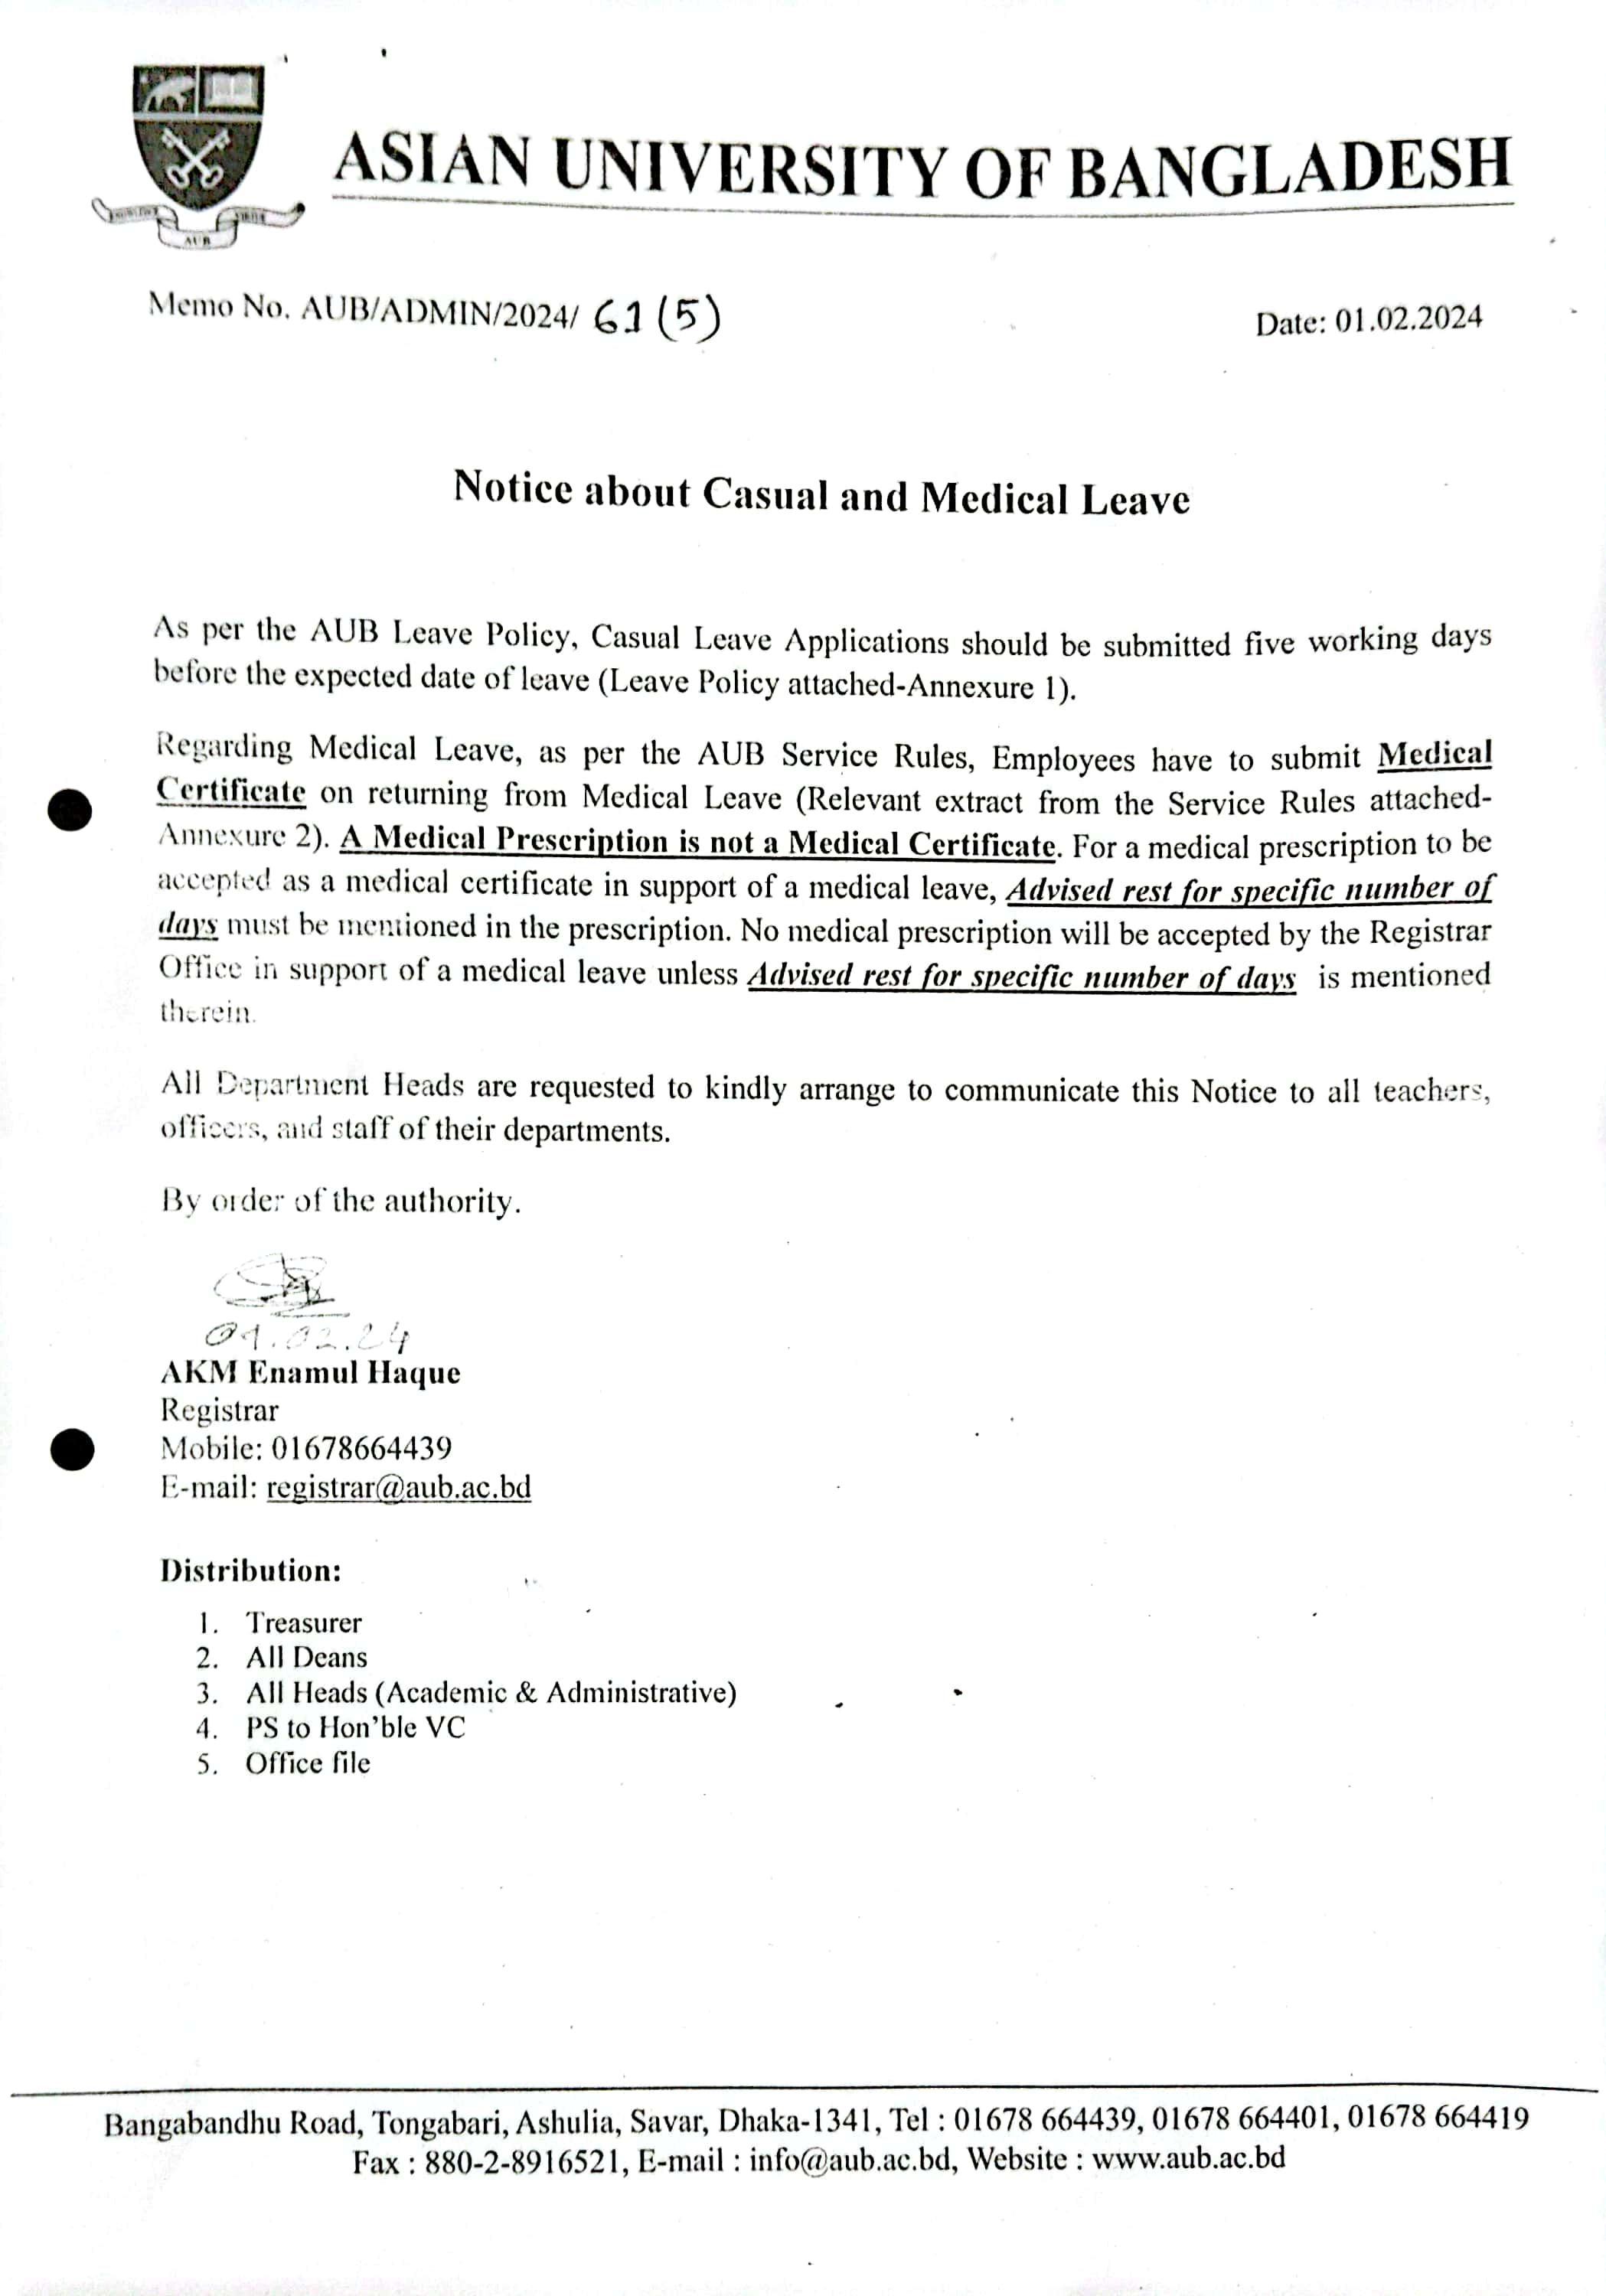 Notice about Casual & Medical Leave image